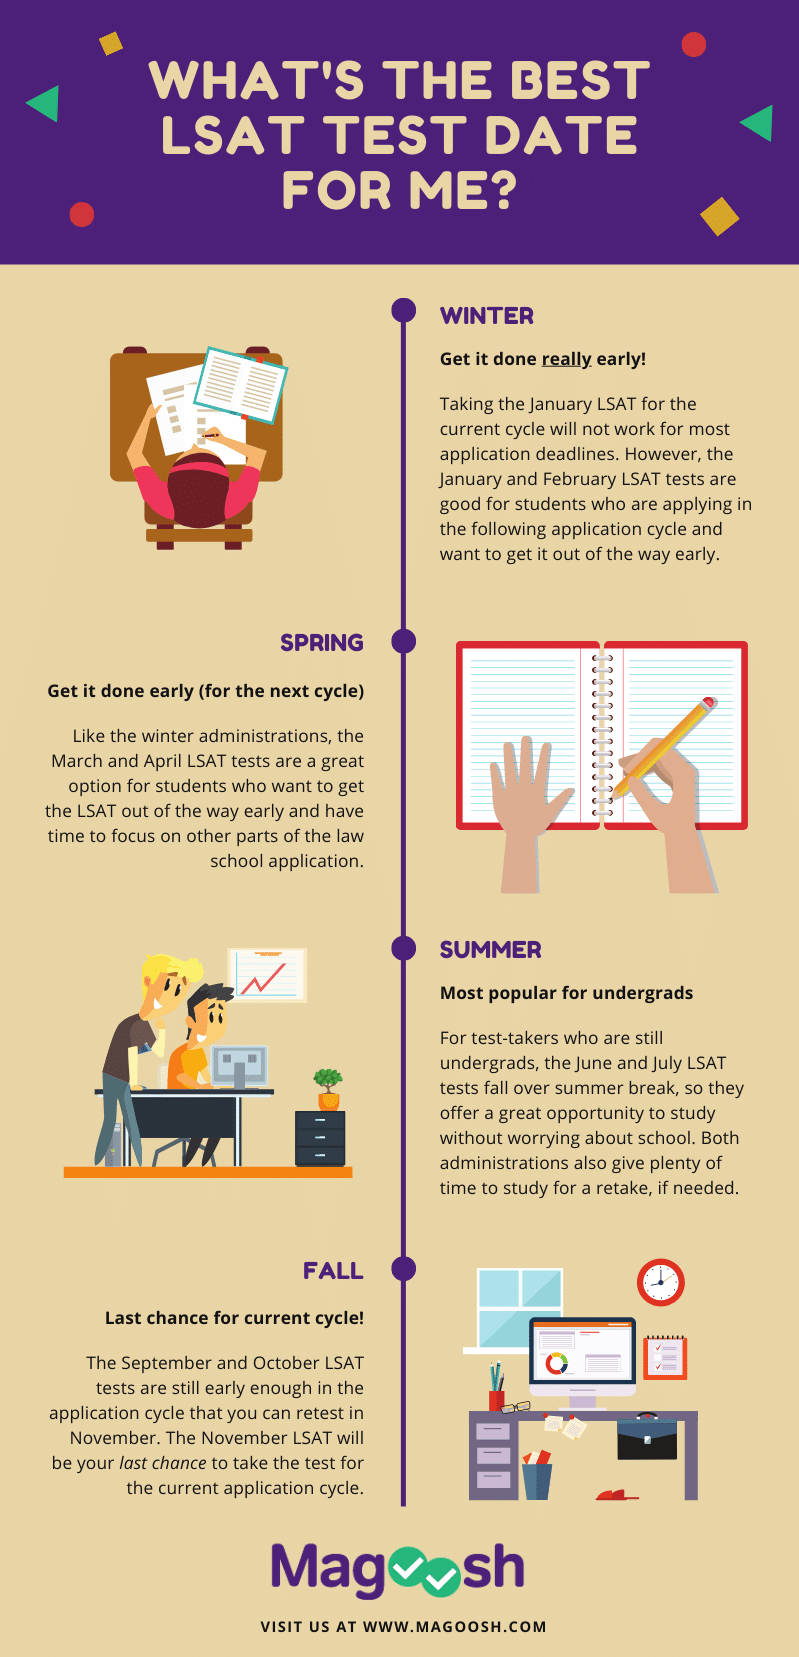 What is the best LSAT test date for me infographic breaking down winter/spring/summer/fall administrations - image by Magoosh